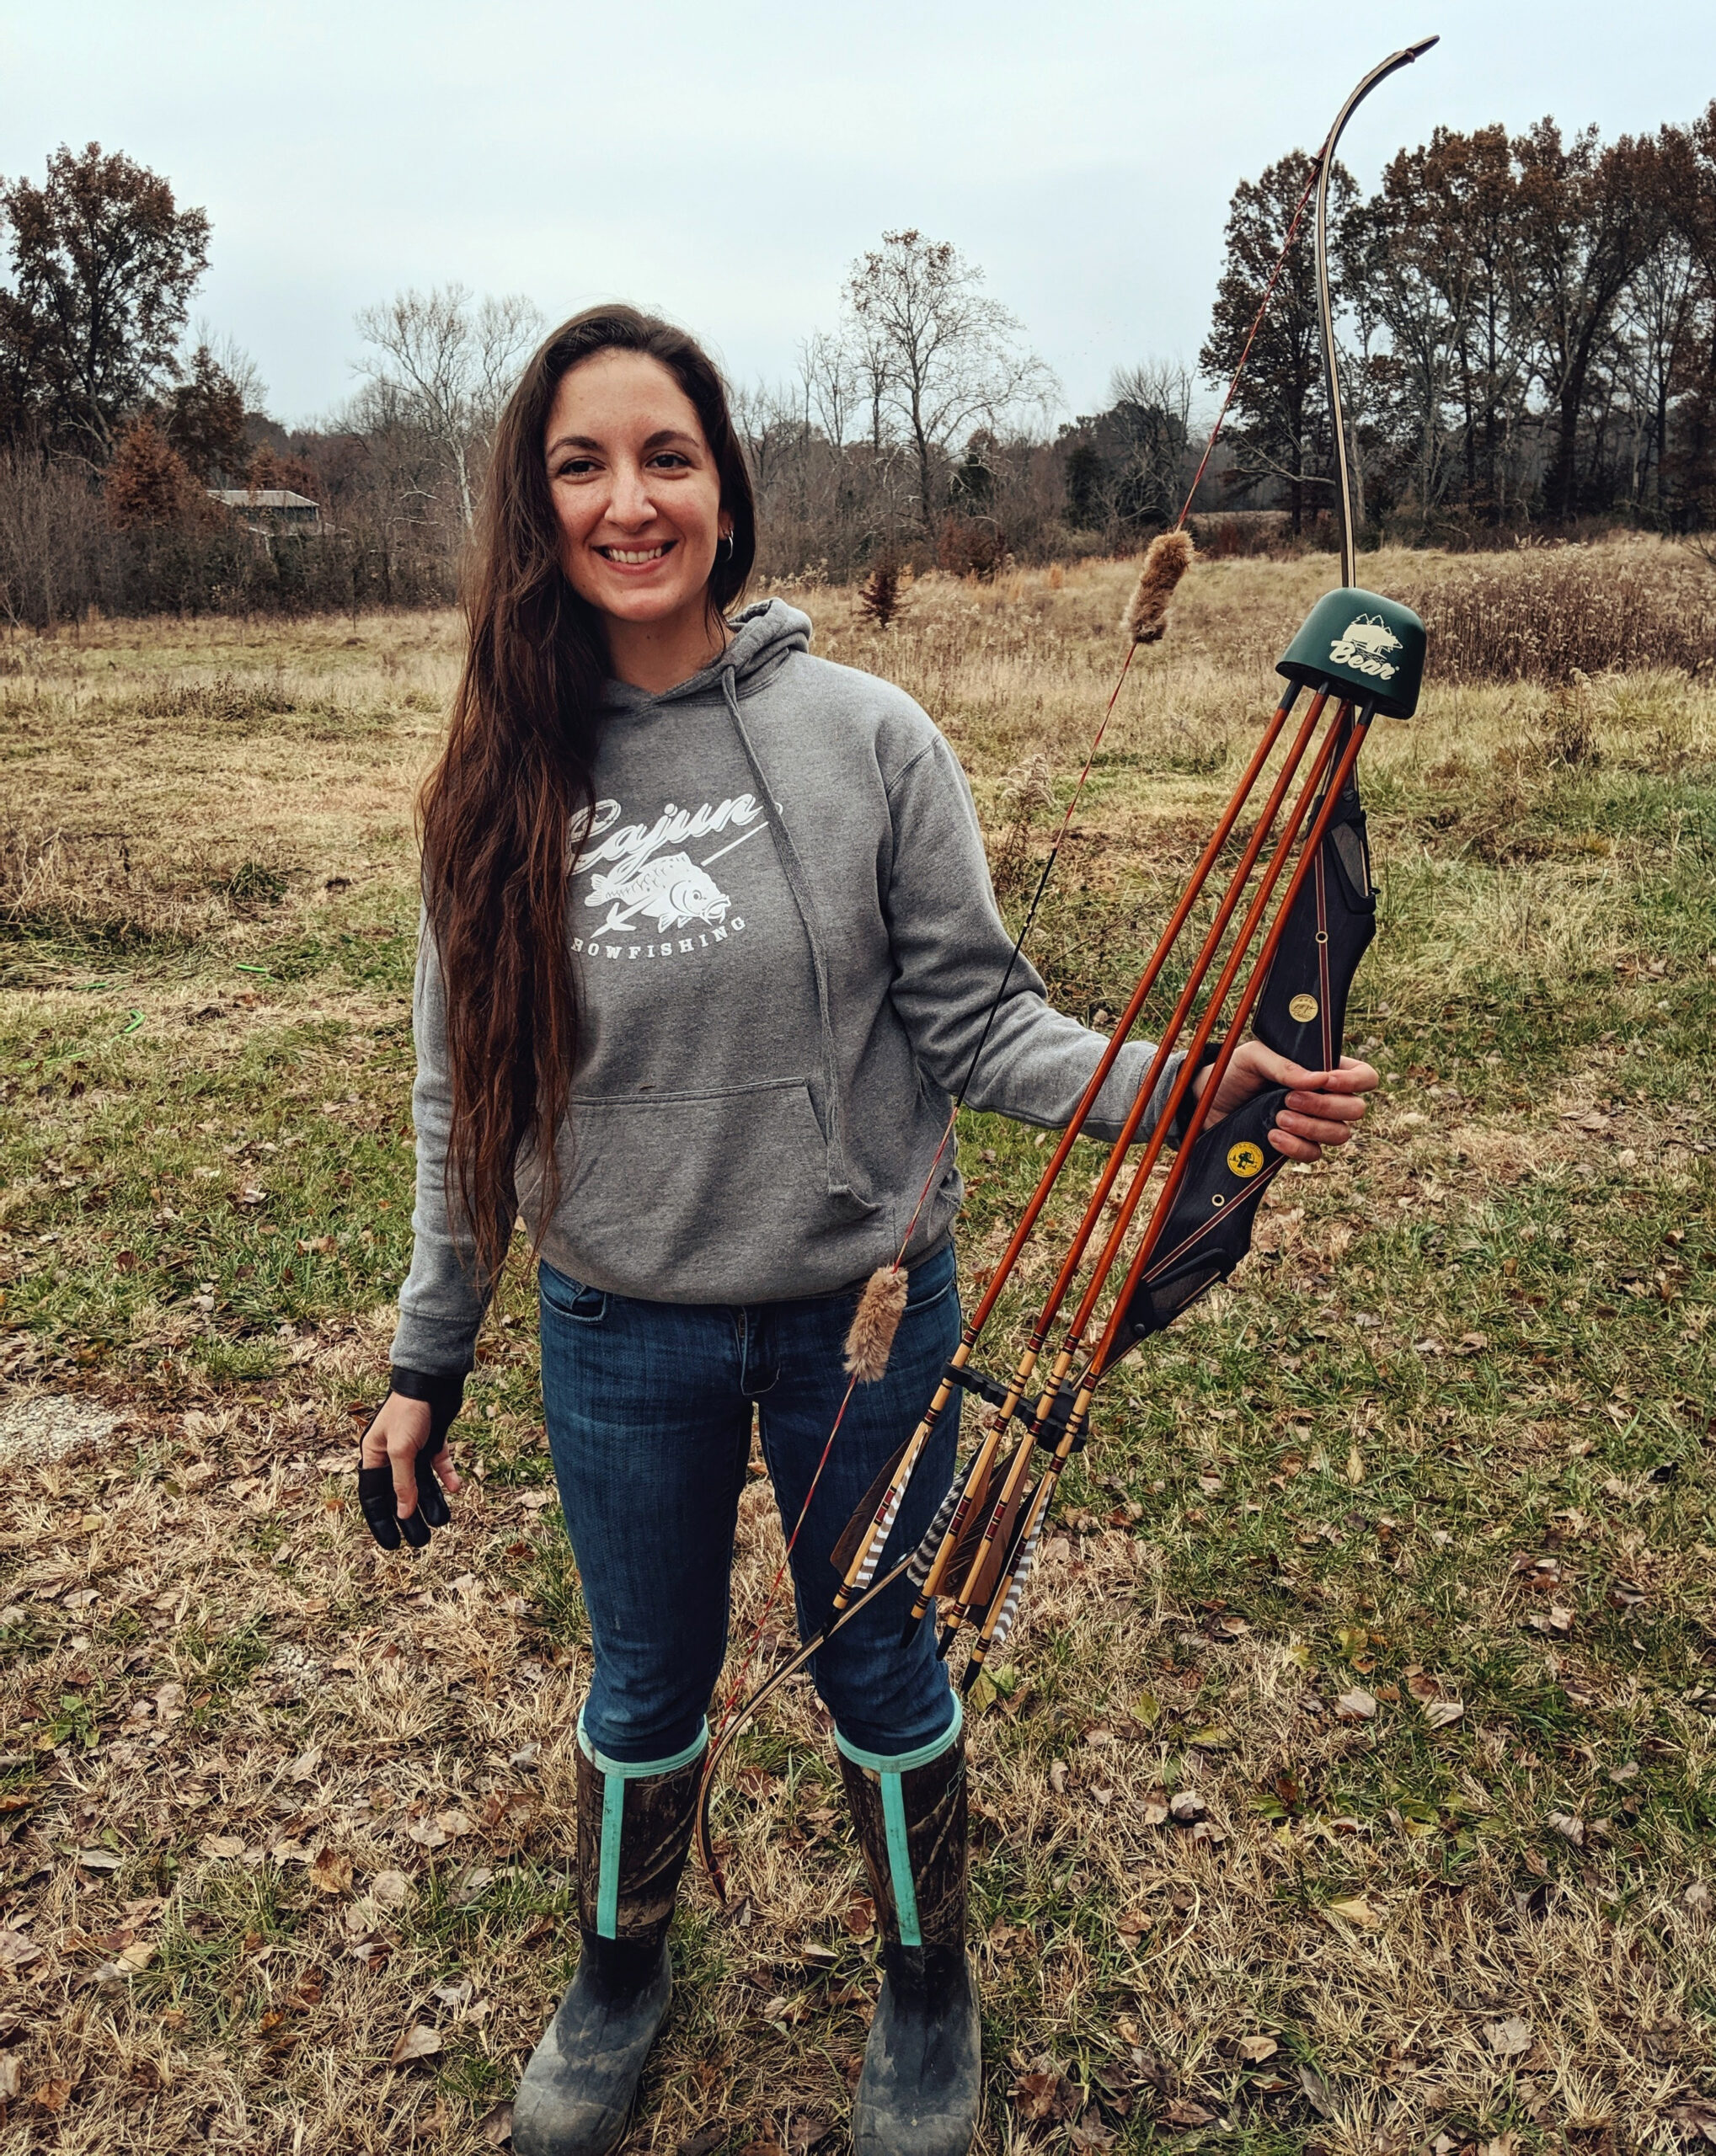 A woman with long hair in a gray hoodie holds a traditional recurve bow with a quiver full of arrows on a gray November day.